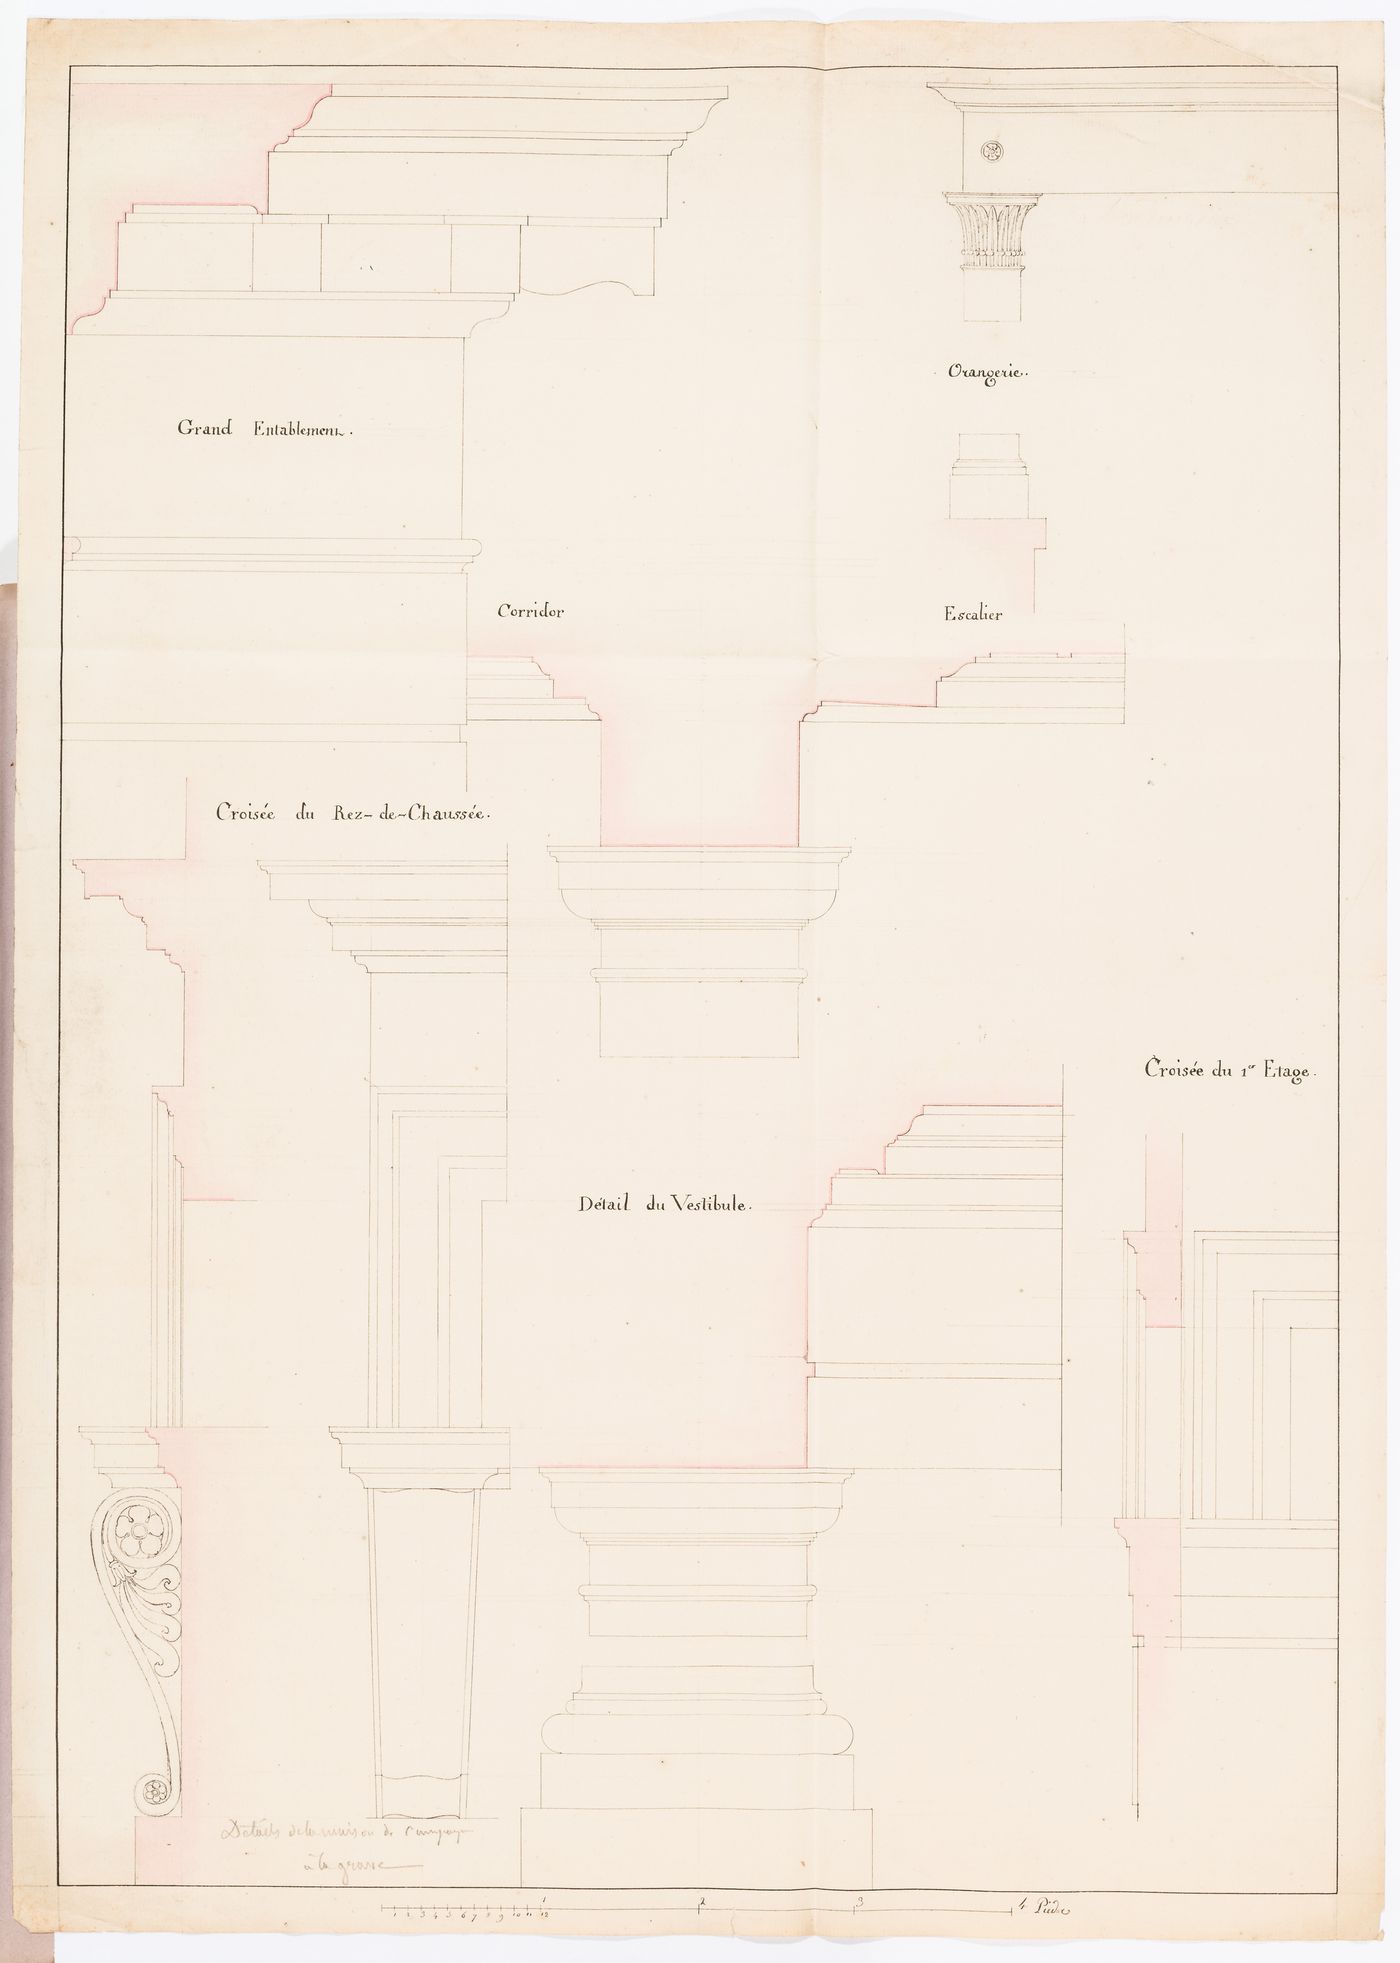 Elevations and profiles for entablatures, bases, capitals and other mouldings for a country house for duc Decazes, Grave